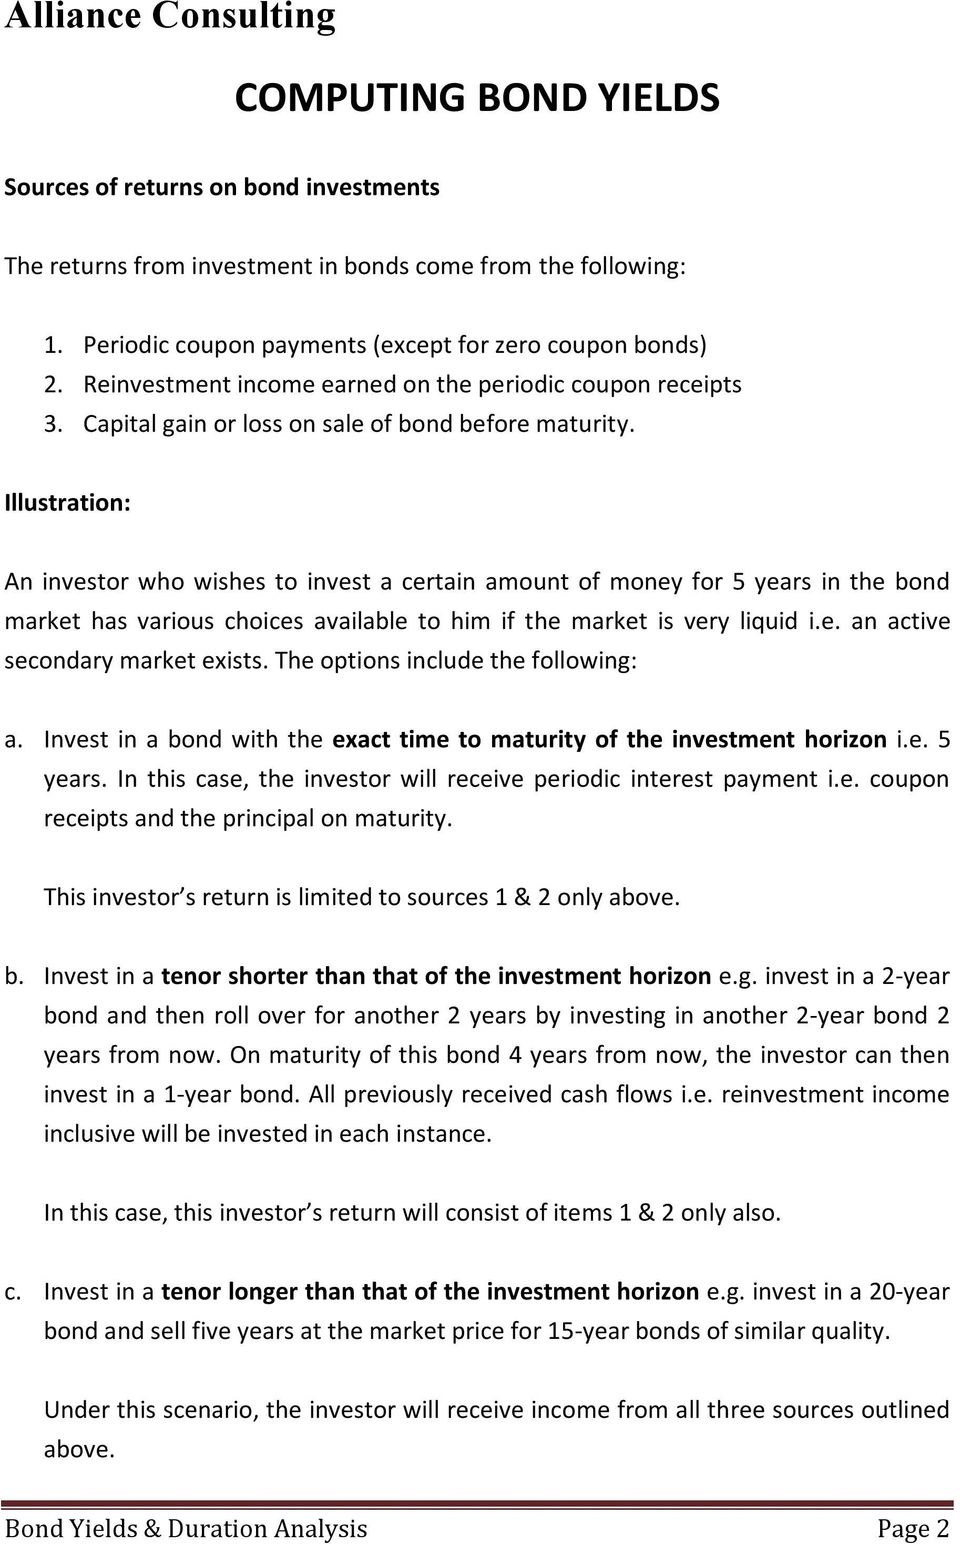 Illustration: An investor who wishes to invest a certain amount of money for 5 years in the bond market has various choices available to him if the market is very liquid i.e. an active secondary market exists.